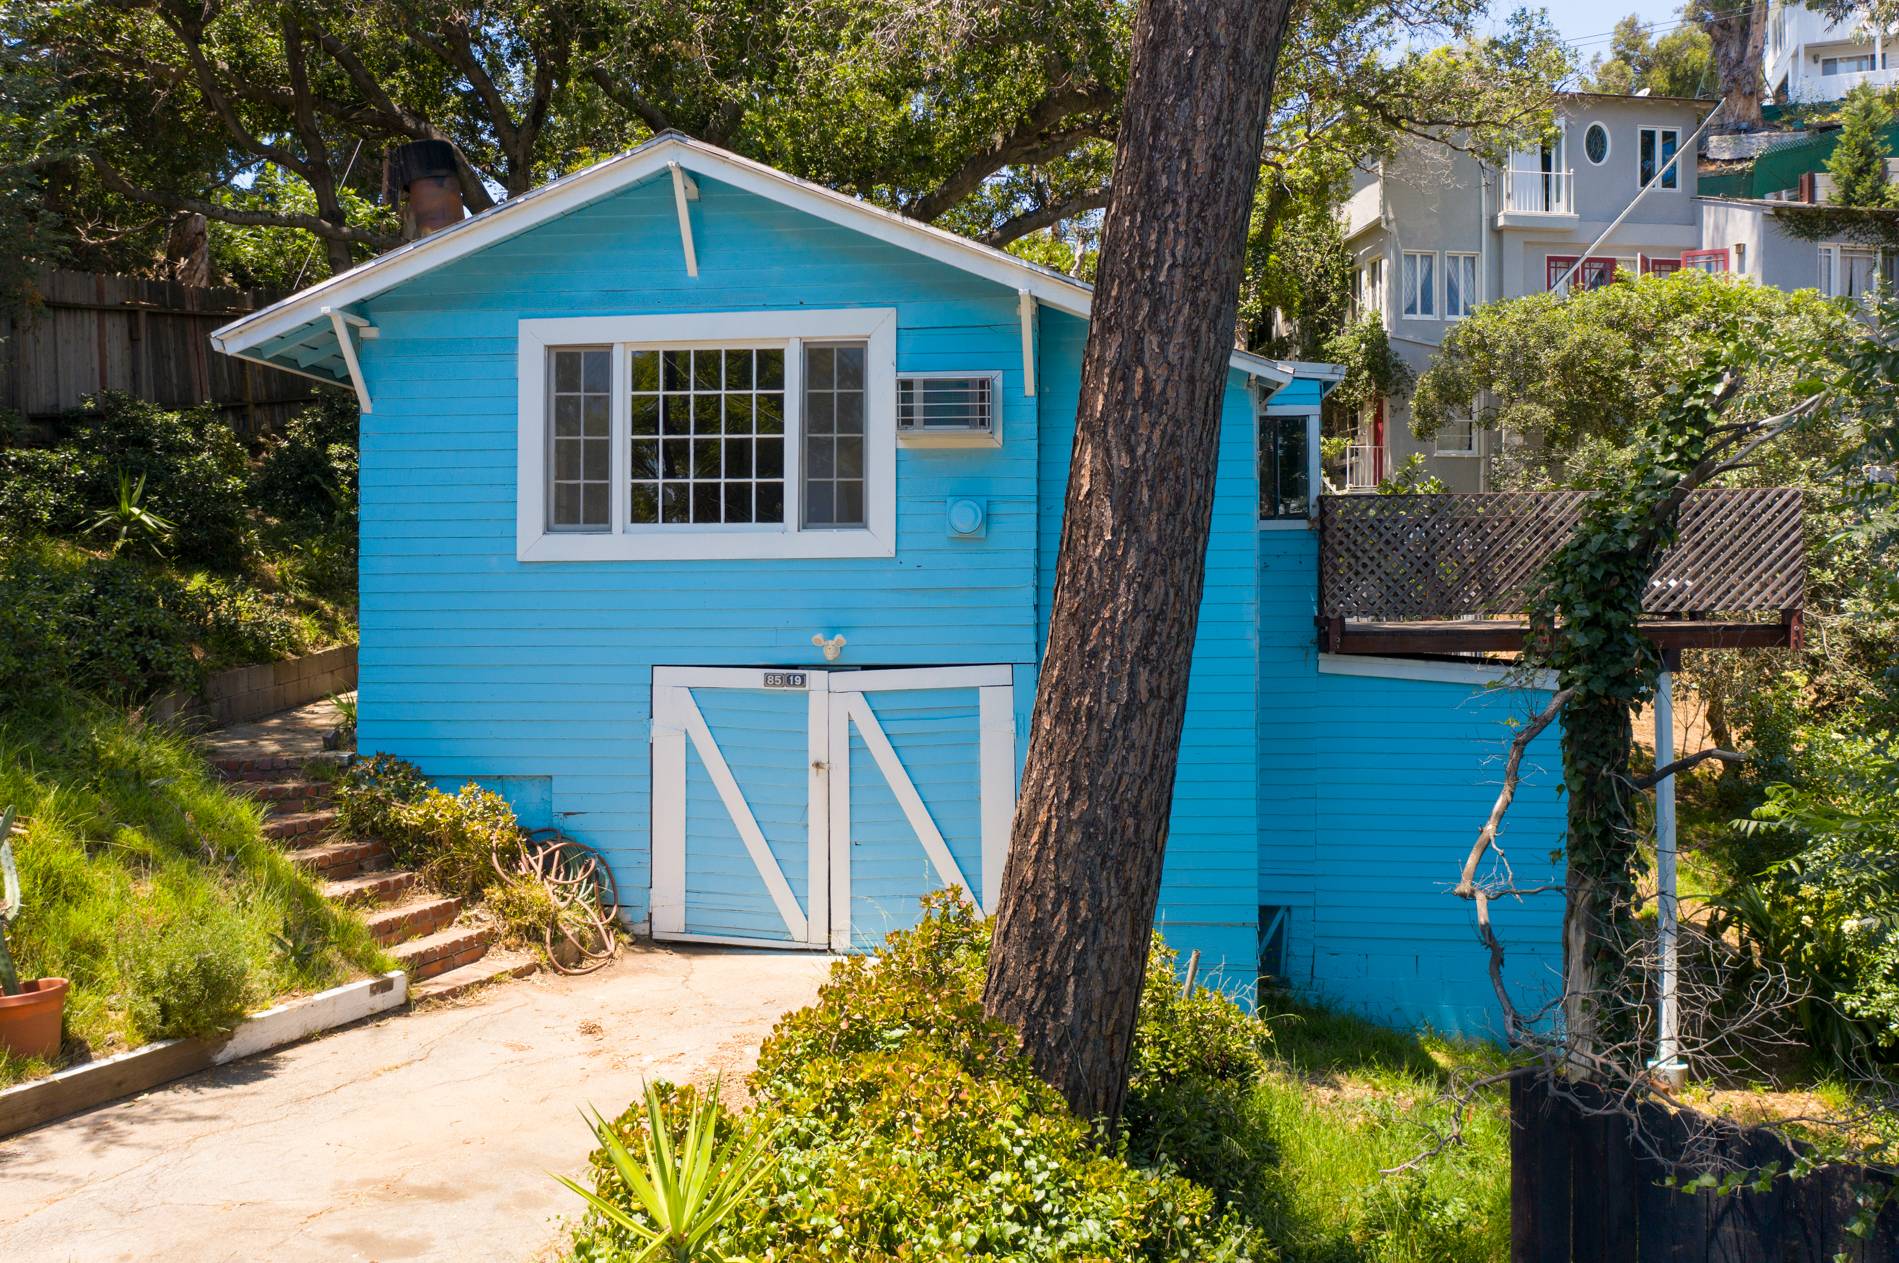 Charming 1 BR Artist Retreat in Historic Laurel Canyon! Views, jacuzzi, Parking! Must see!